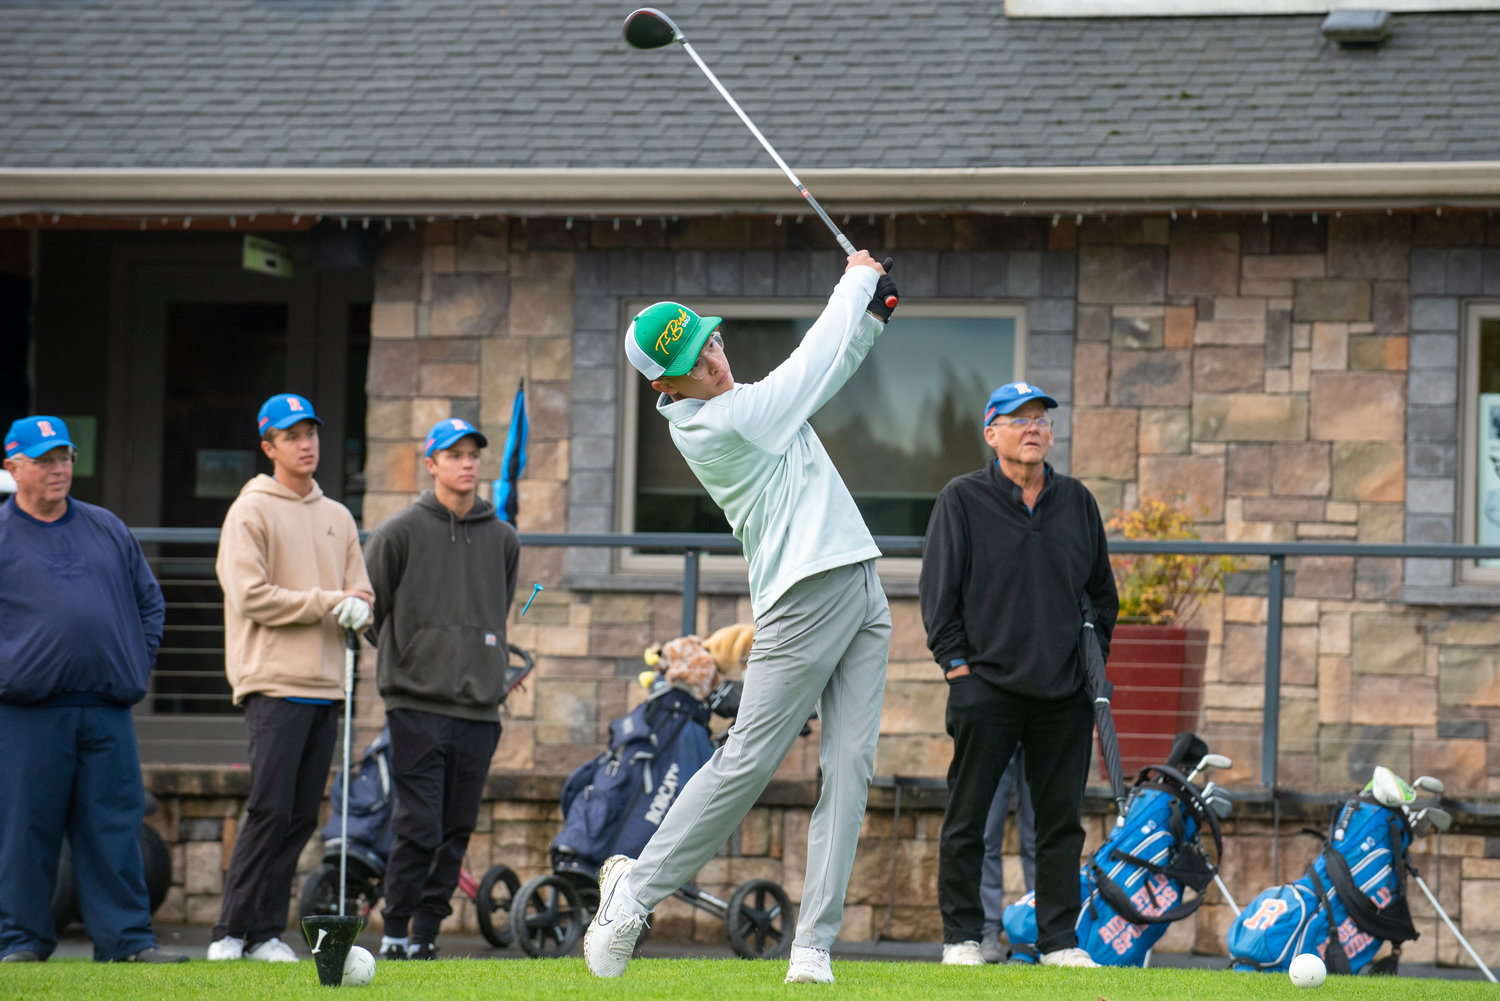 Tumwater's Kaden Clark tees off on Day One of the 2A District 4 Boys Golf Tournament at Riverside Golf Course in Chehalis on Oct. 20, 2021.